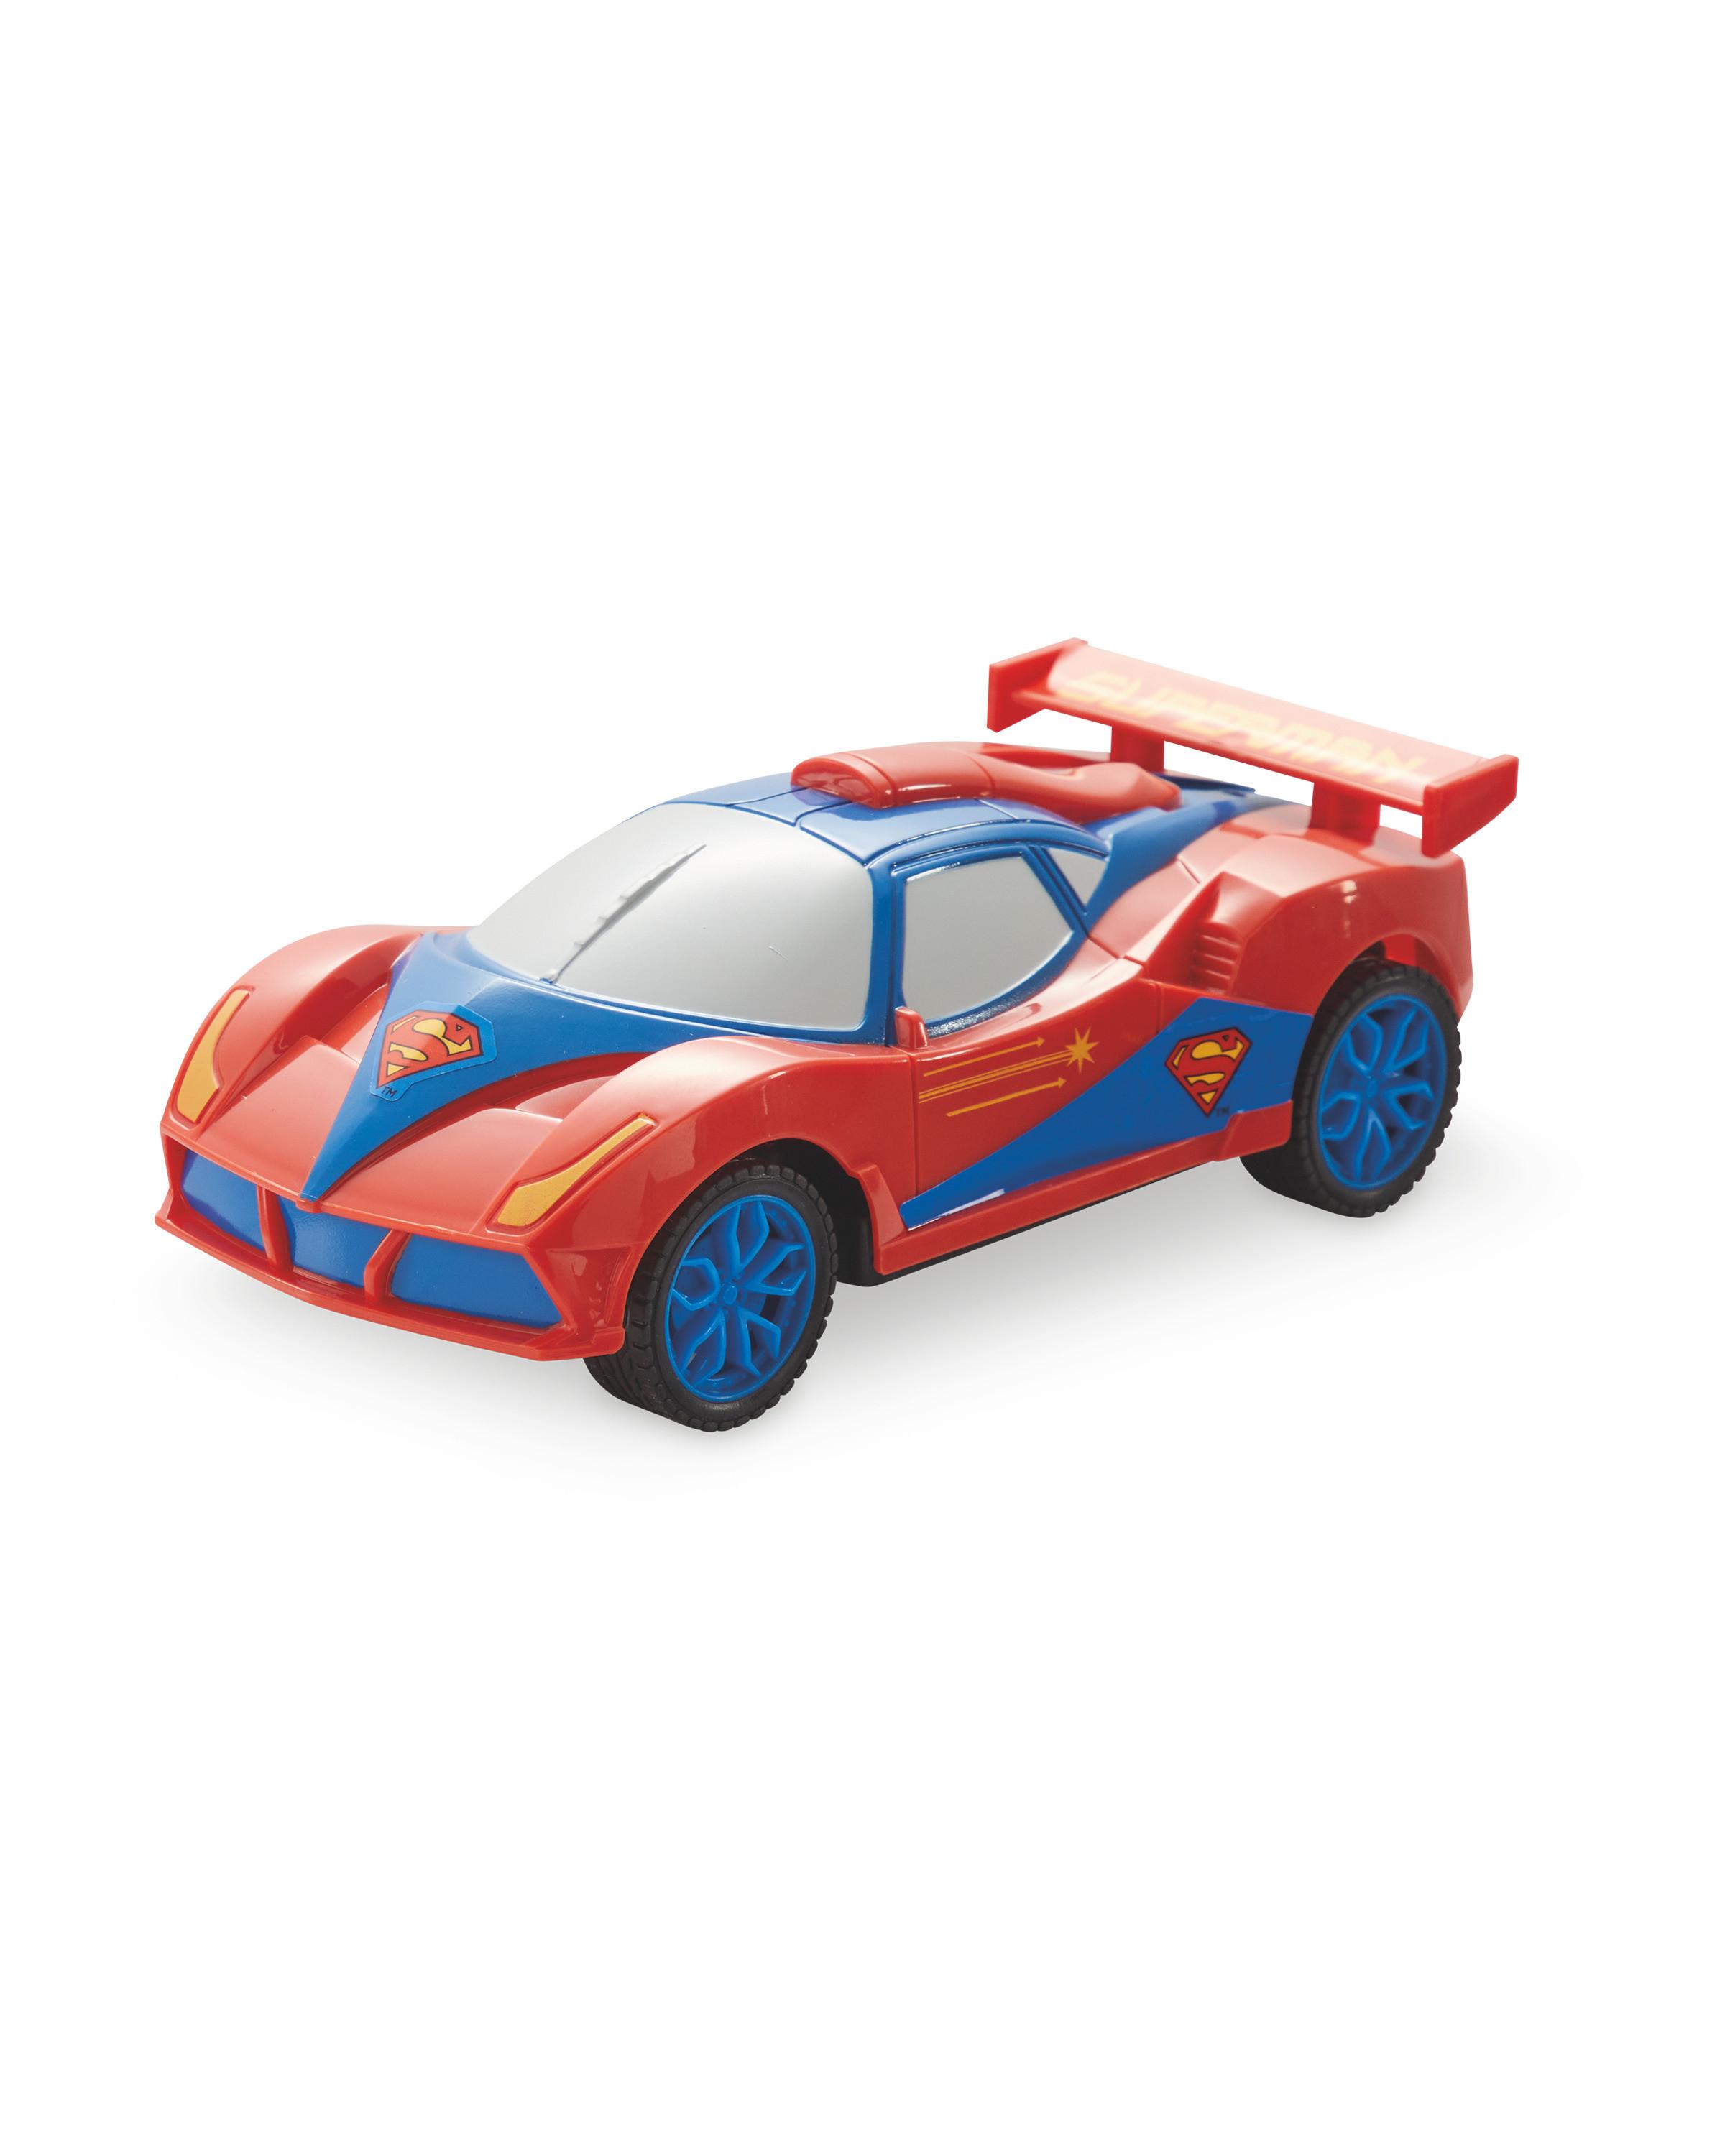 Superman Remote Control Car: Target audience for Superman remote control car: children, fans, collectors, enthusiasts